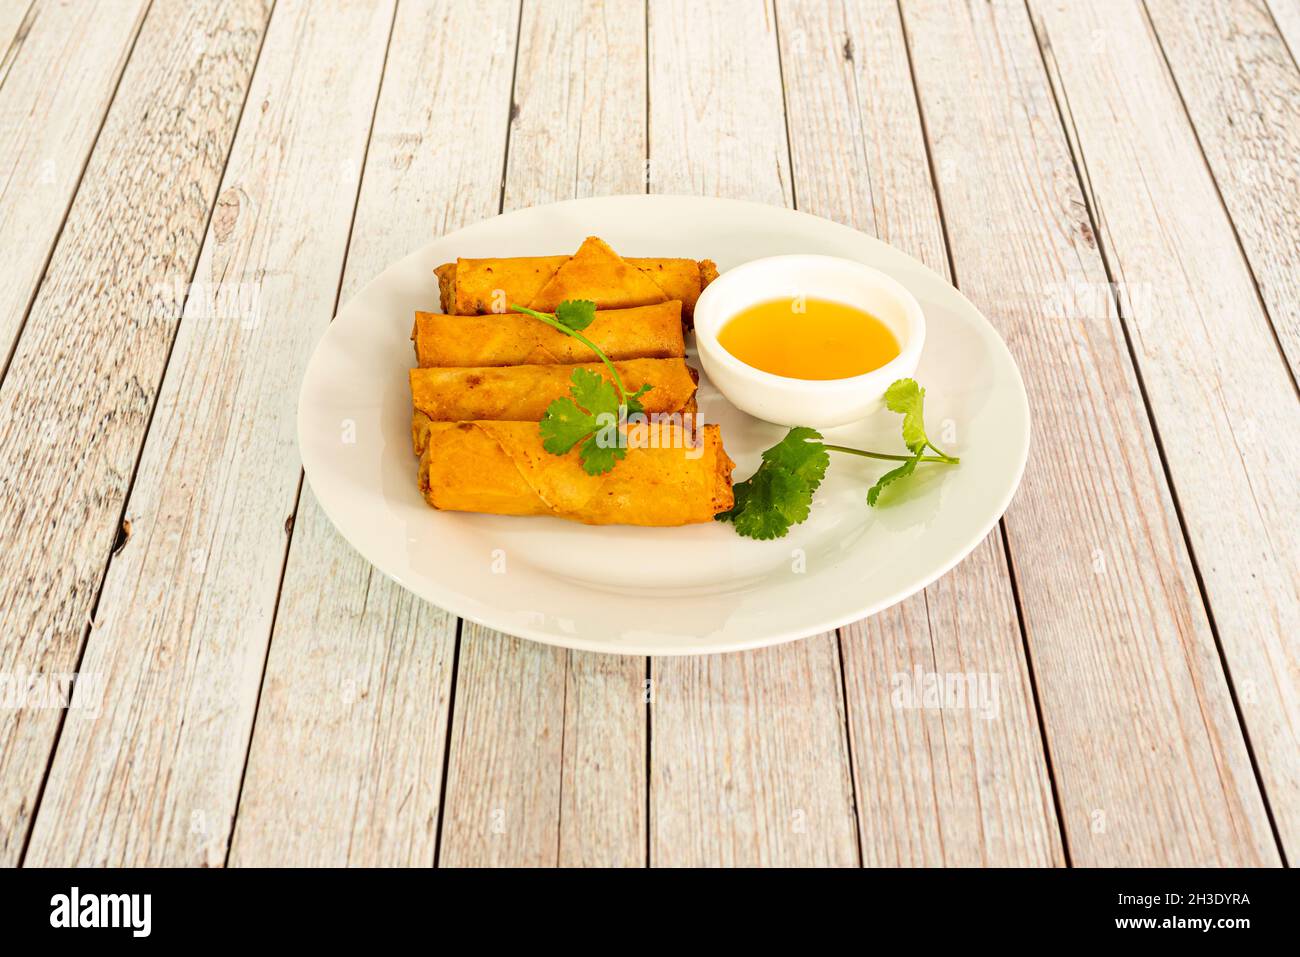 Vietnamese spring rolls fried in oil with crunchy texture and curry sauce Stock Photo